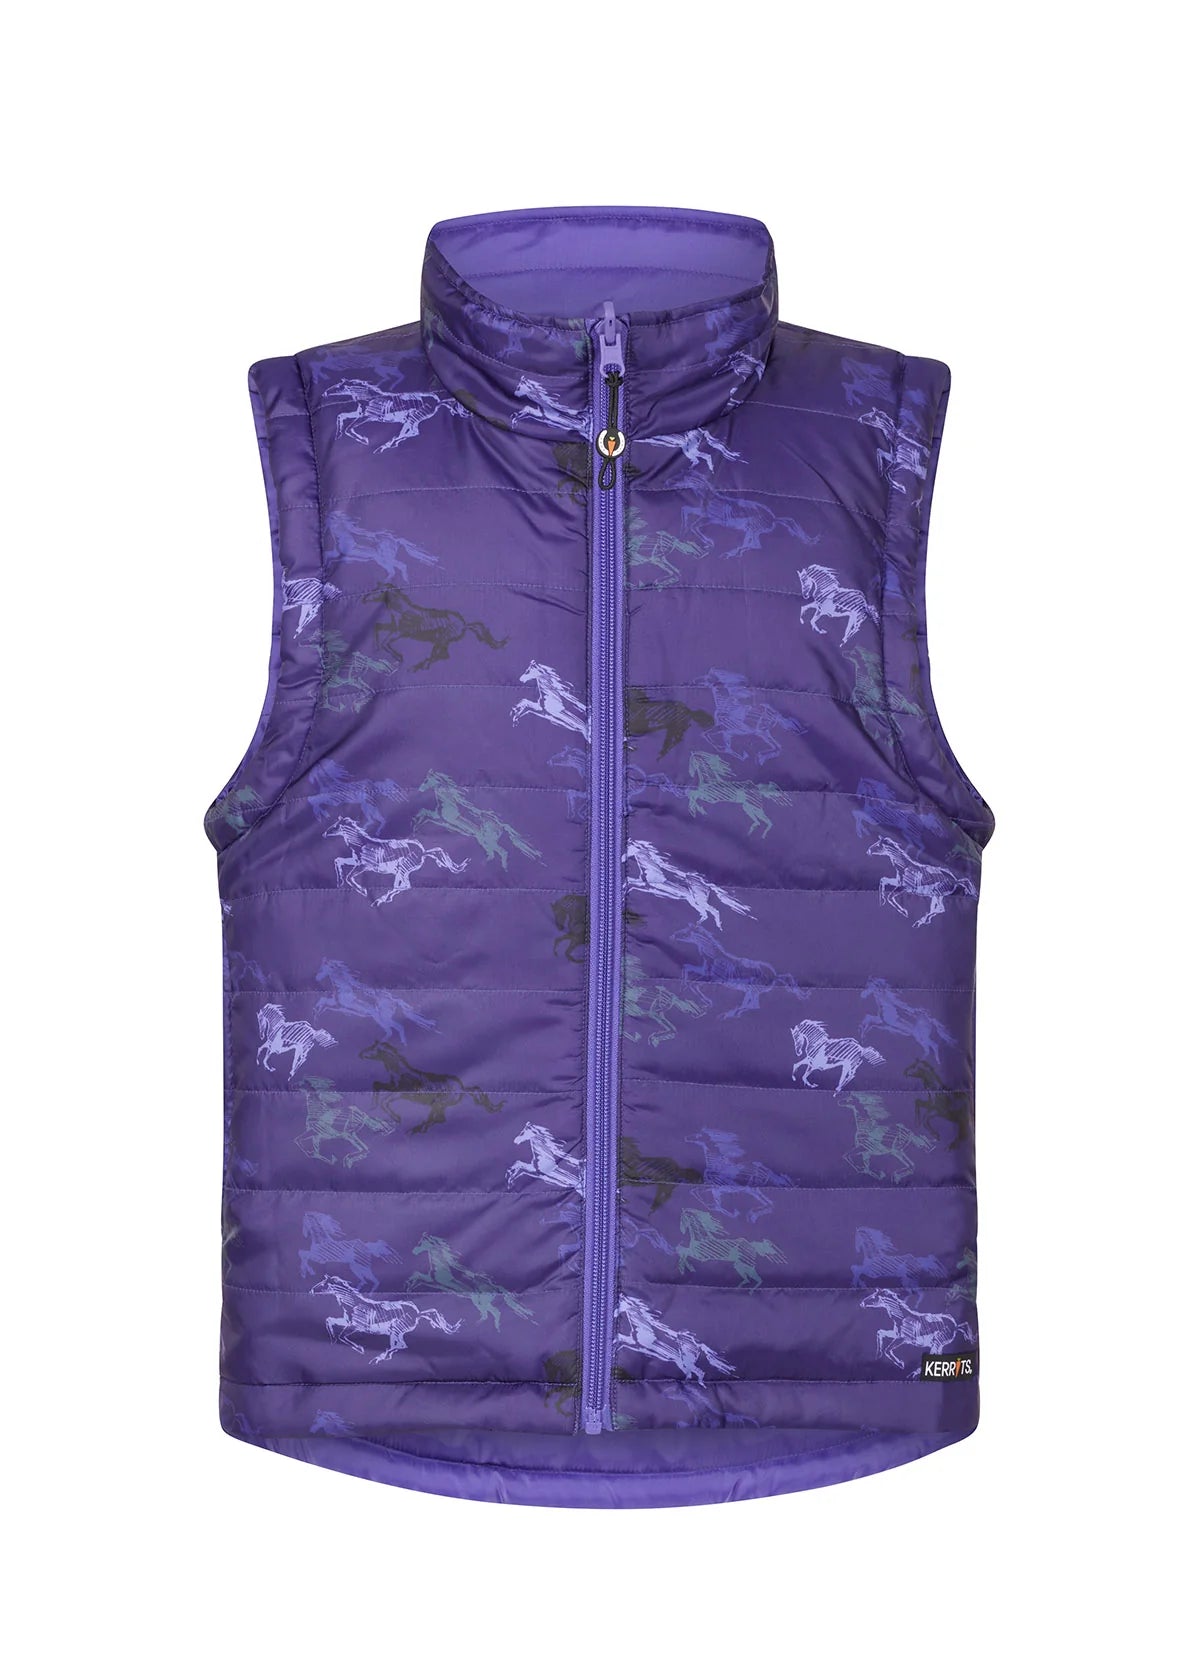 Kerrits Kids Pony Tracks Reversible Quilted Riding Vest - CLEARANCE - Equine Exchange Tack Shop